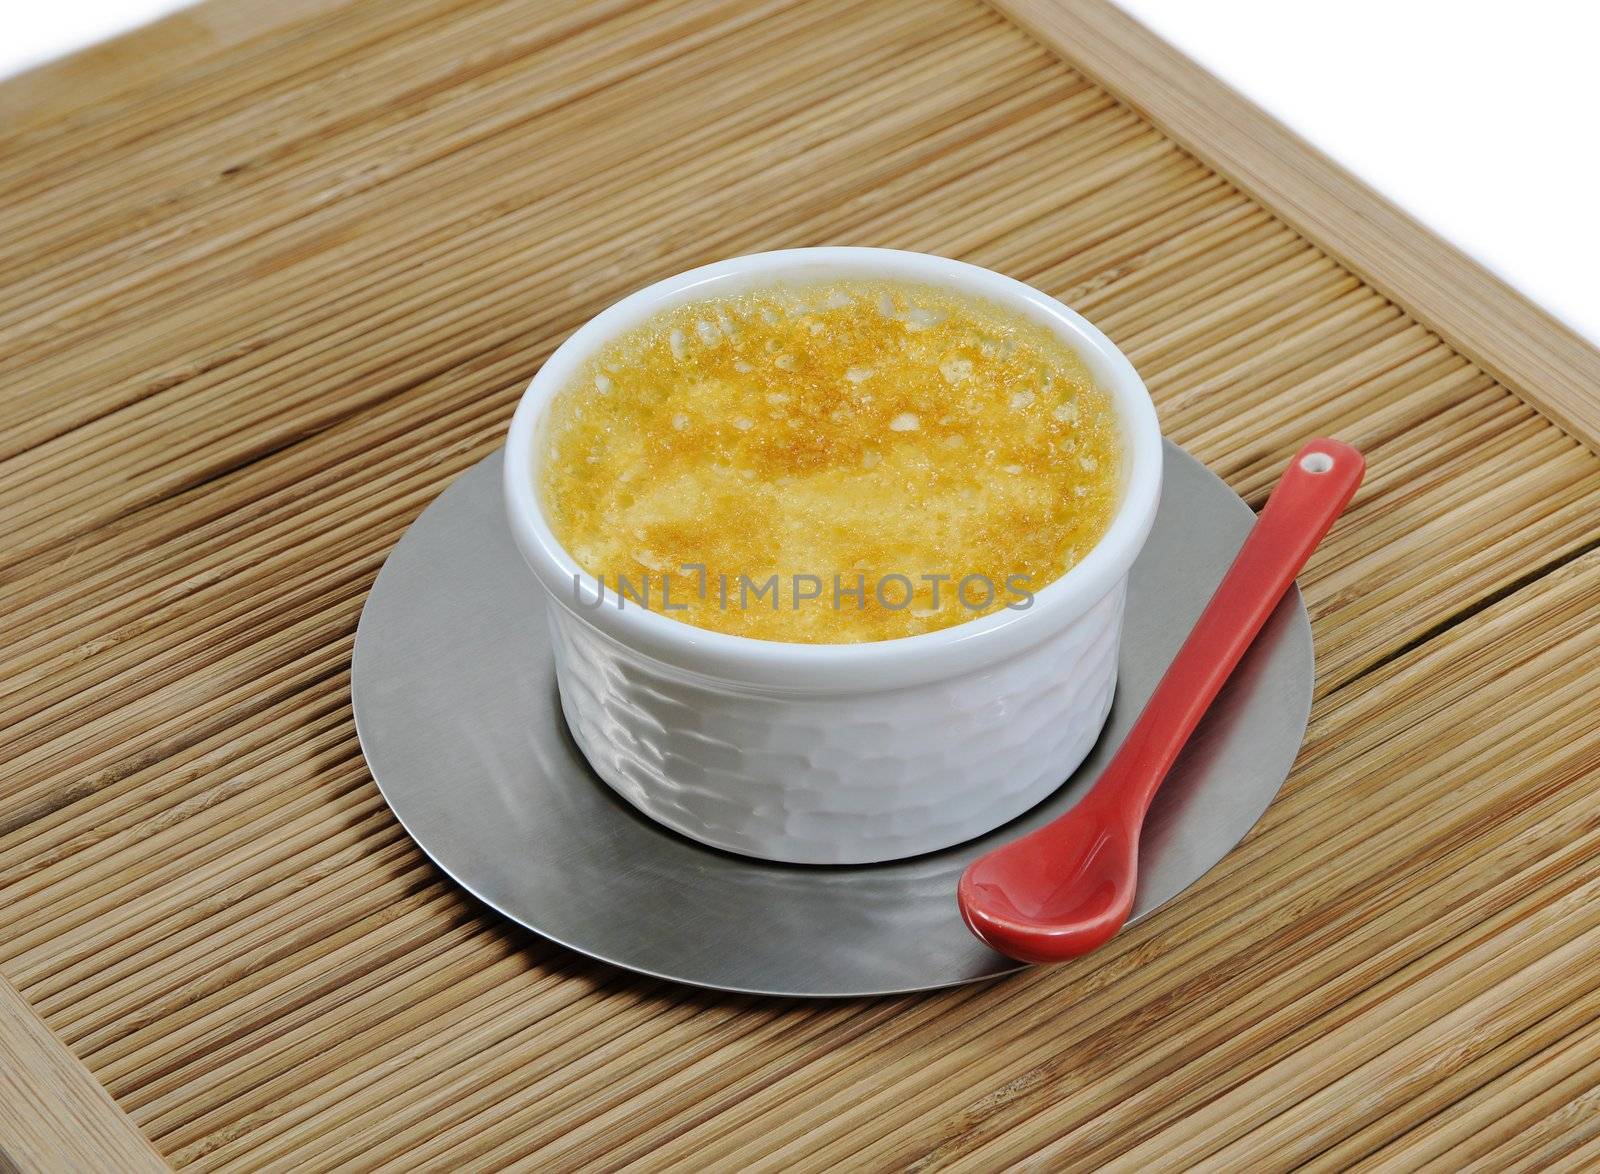 Custard with an iron steel saucer and a red ceramic spoon on a bamboo tray